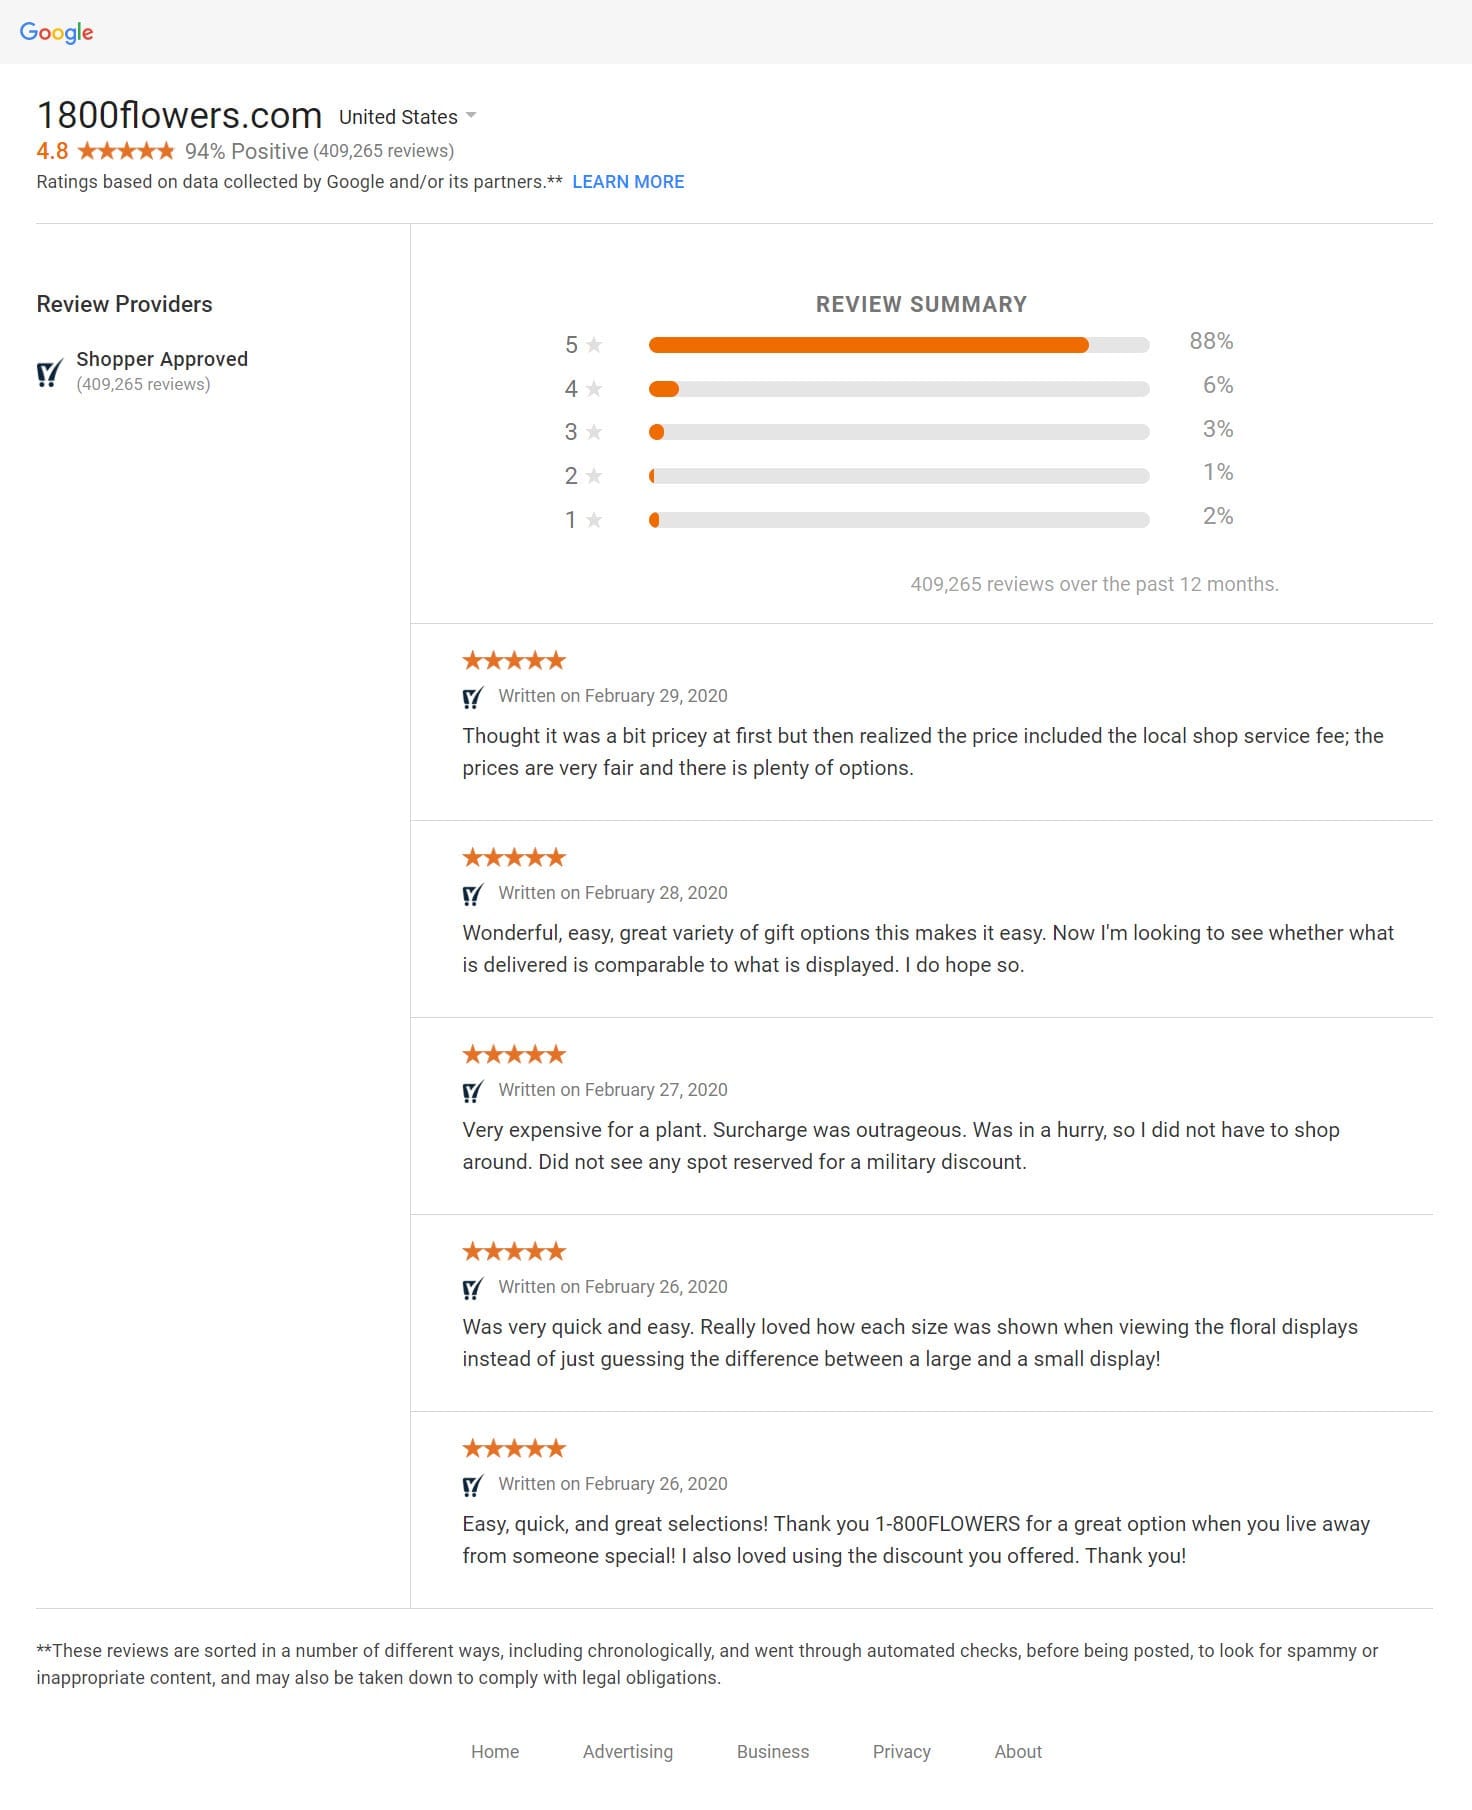 google seller ratings page for 1-800-flowers